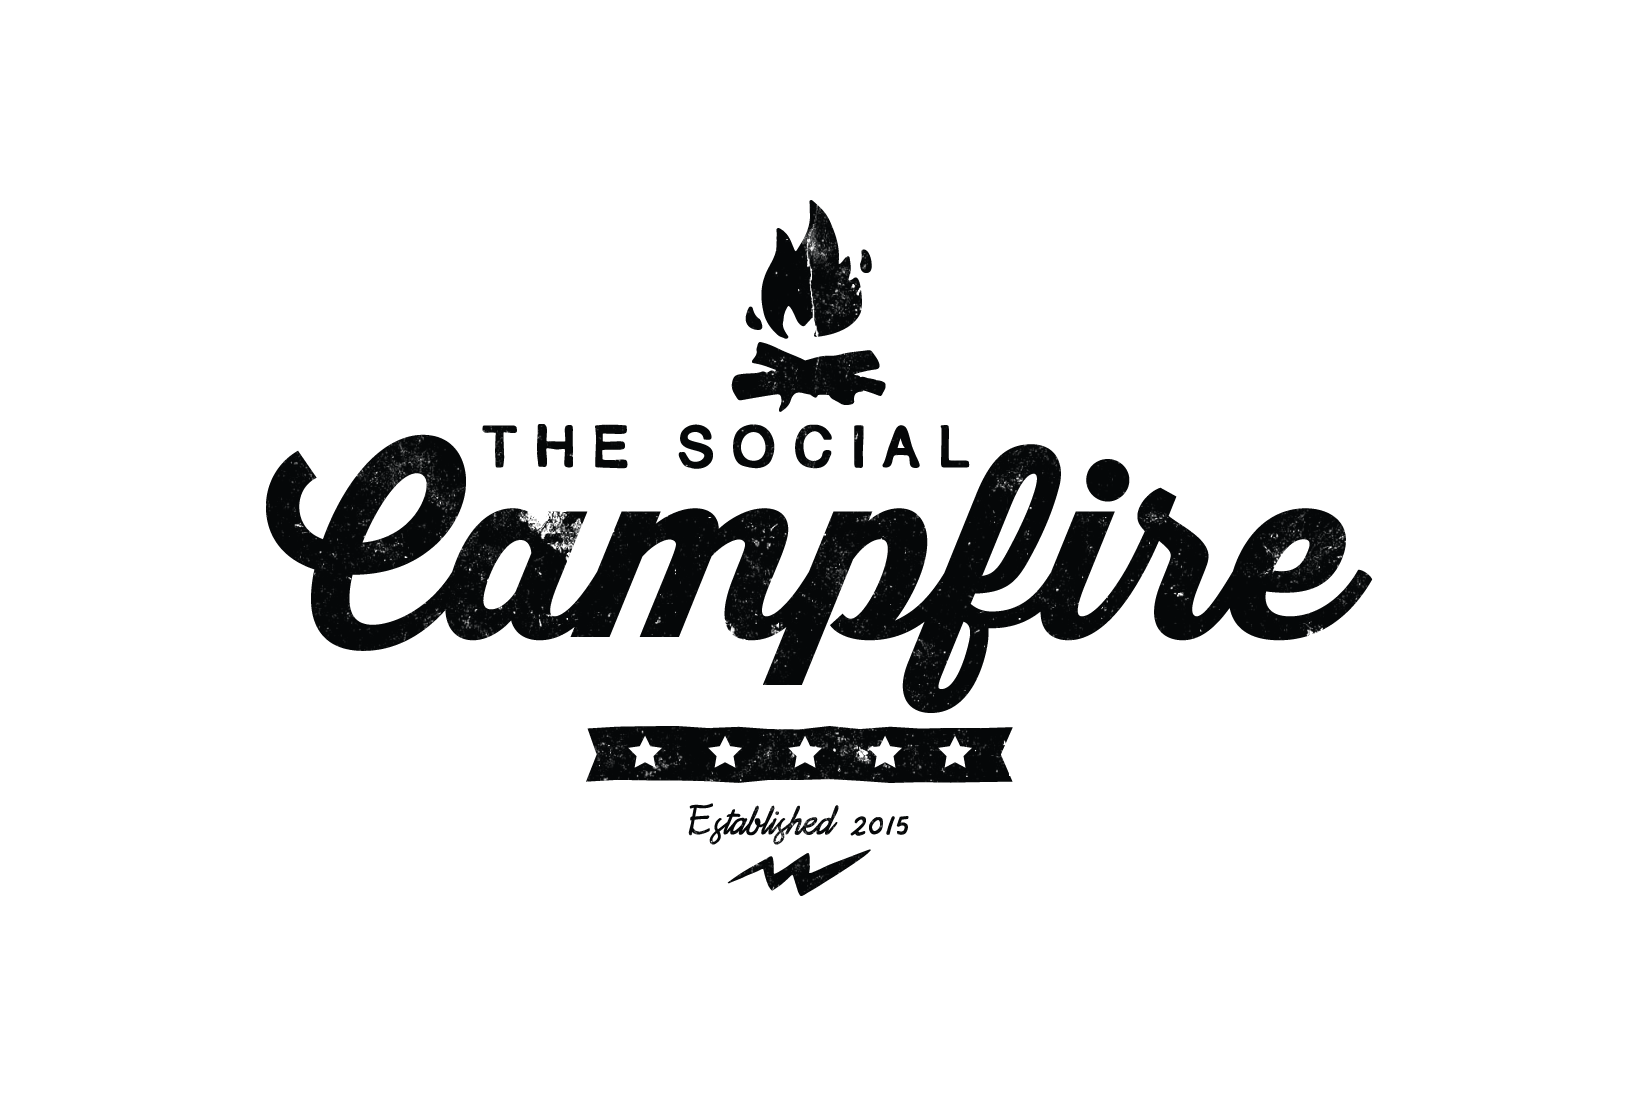 Campfire Logo - Image result for campfire logo | Am to Pm Design Projects ...